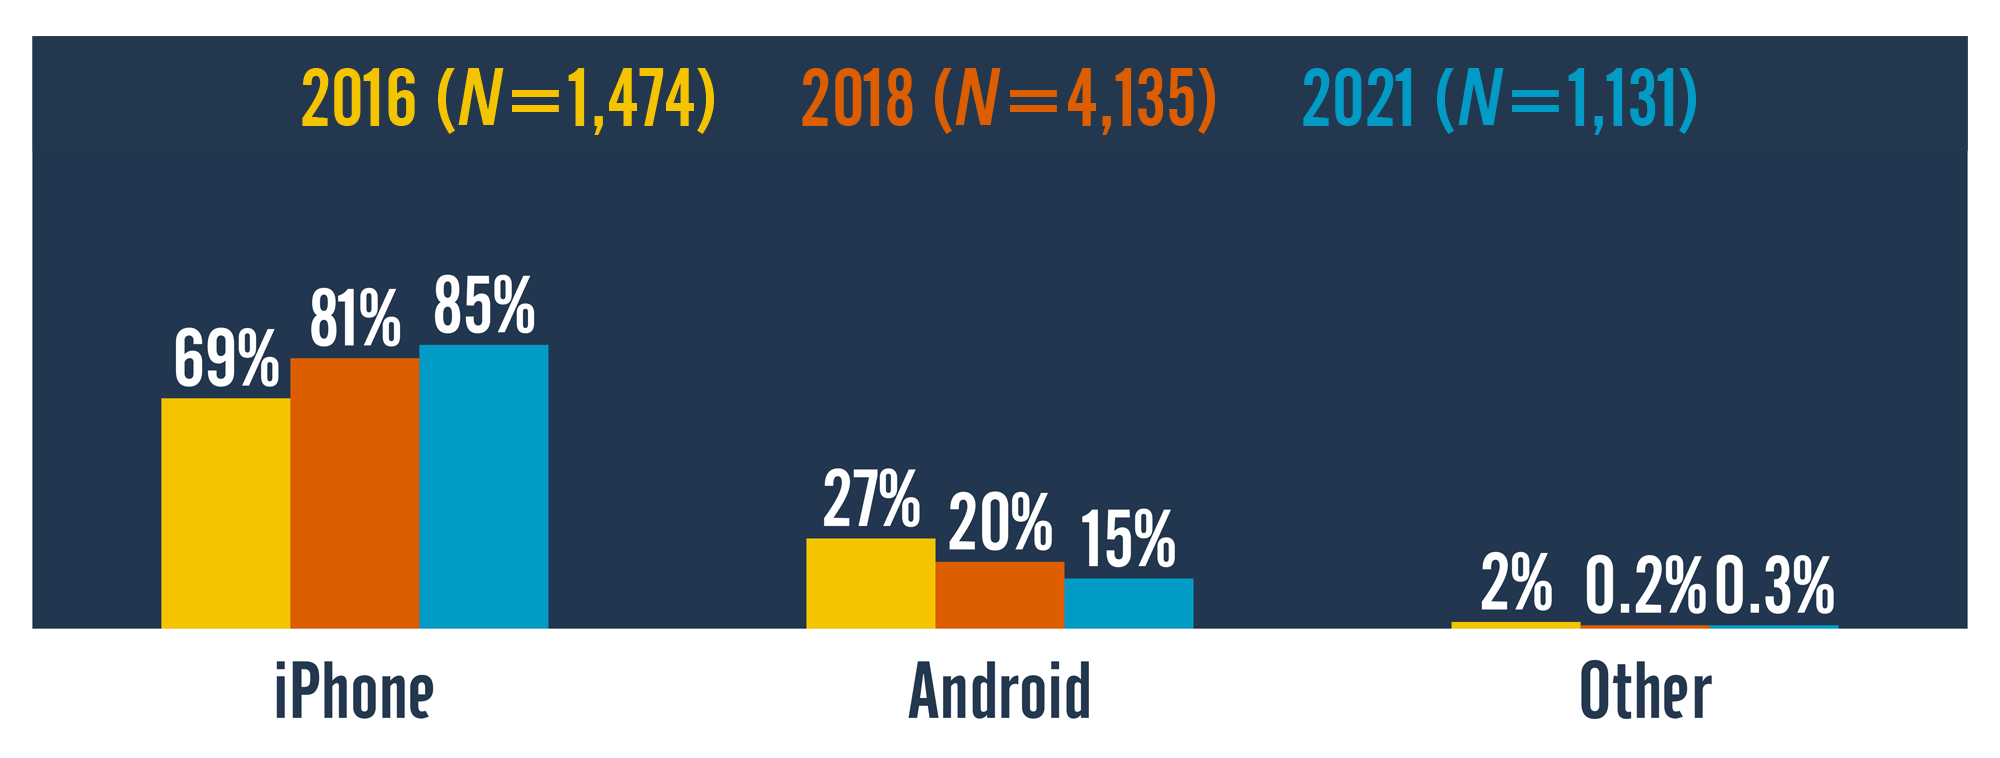 Column chart comparing smartphone ownership by brand across three survey years (2016, 2018, and 2021). Ownership of iPhones in those three years was 69%, 81%, and 85%. Ownership of Android phones was 27%, 20%, and 15%. Ownership of other smartphones was 2%, 0.2%, and 0.3%.